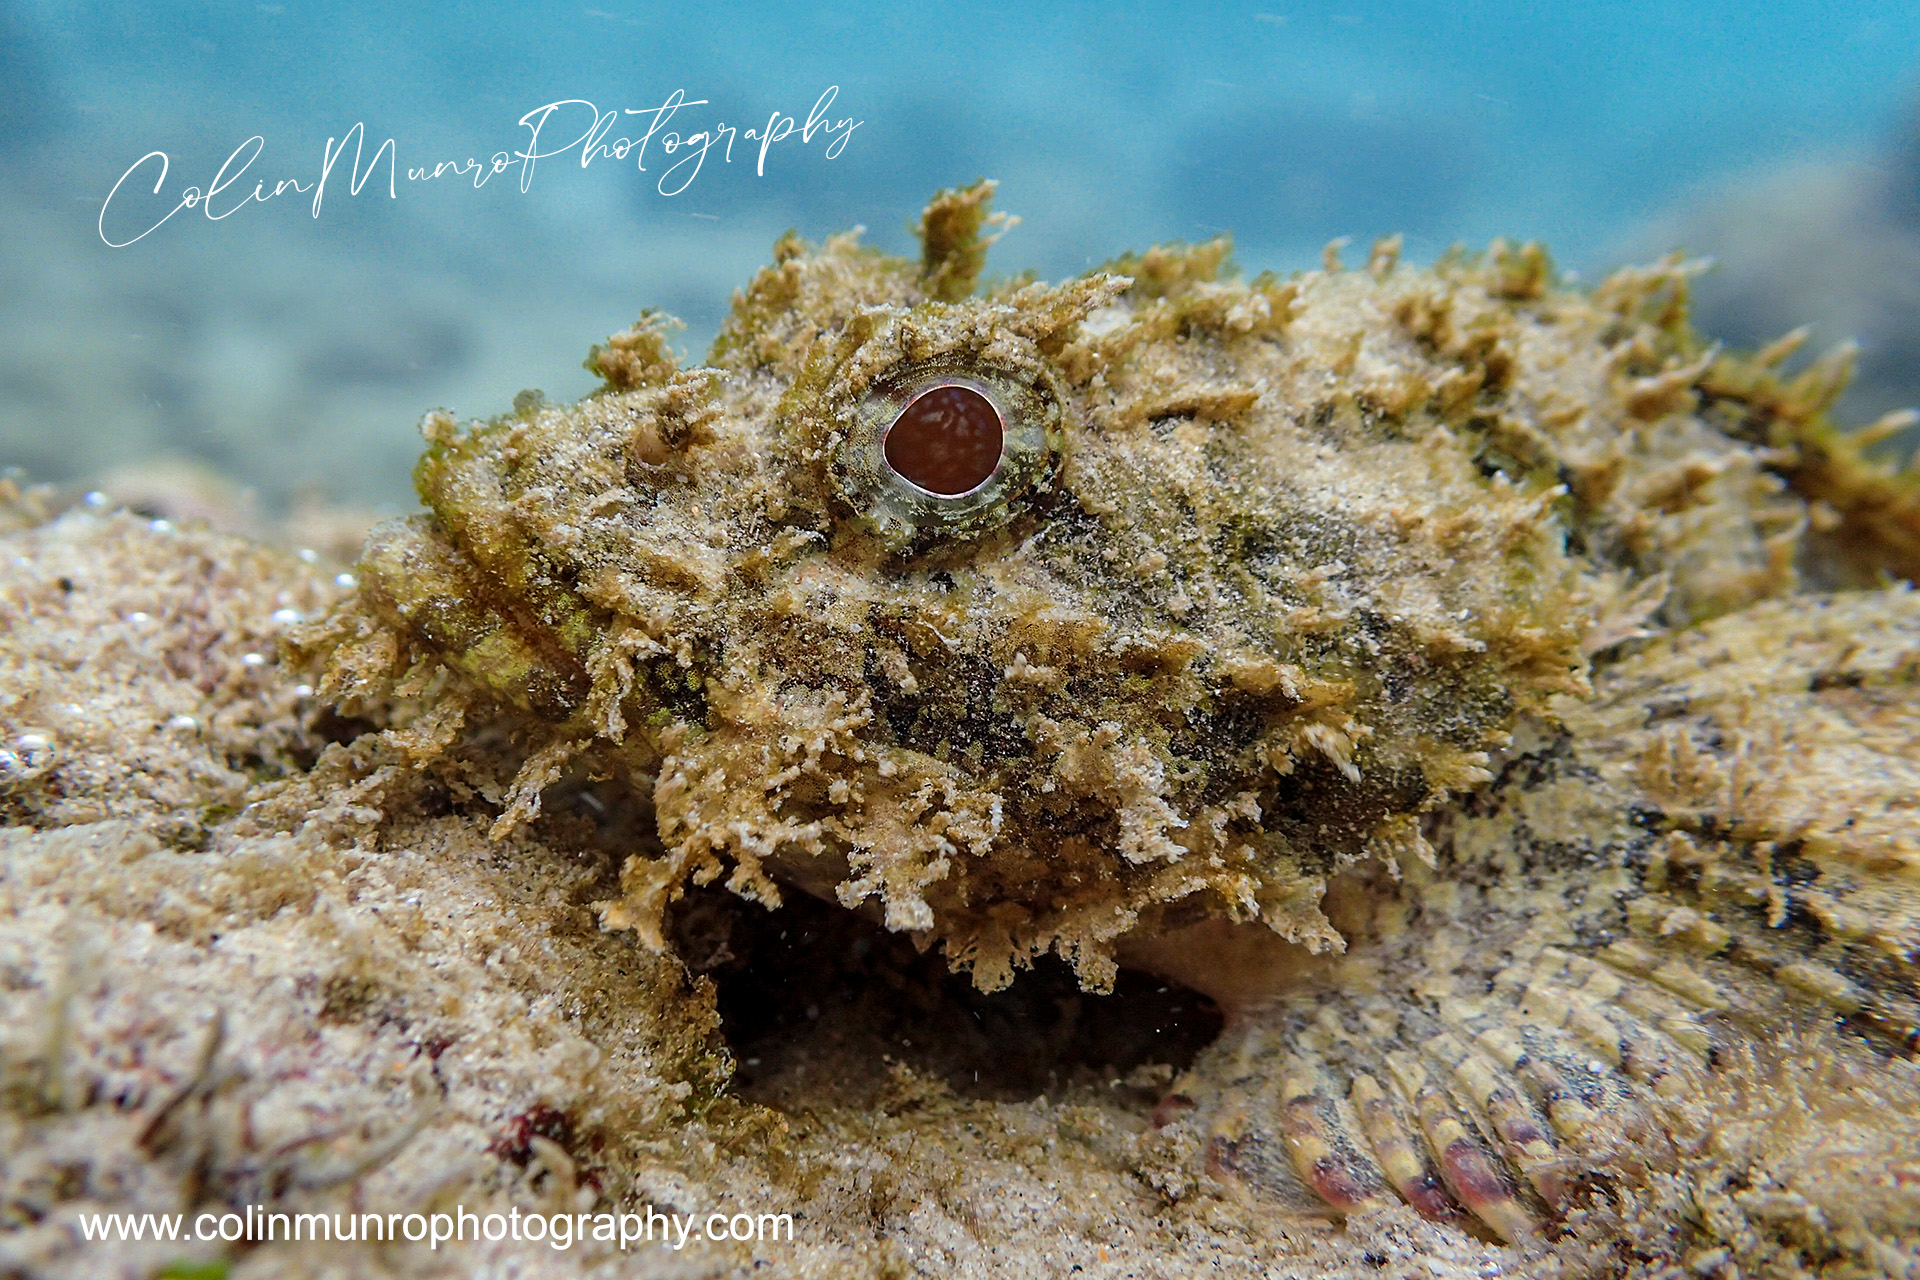 A scorpionfish sits camouflaged on a rock. Phuket, Thailand. @ Colin Munro Photography www.colinmunrophotography